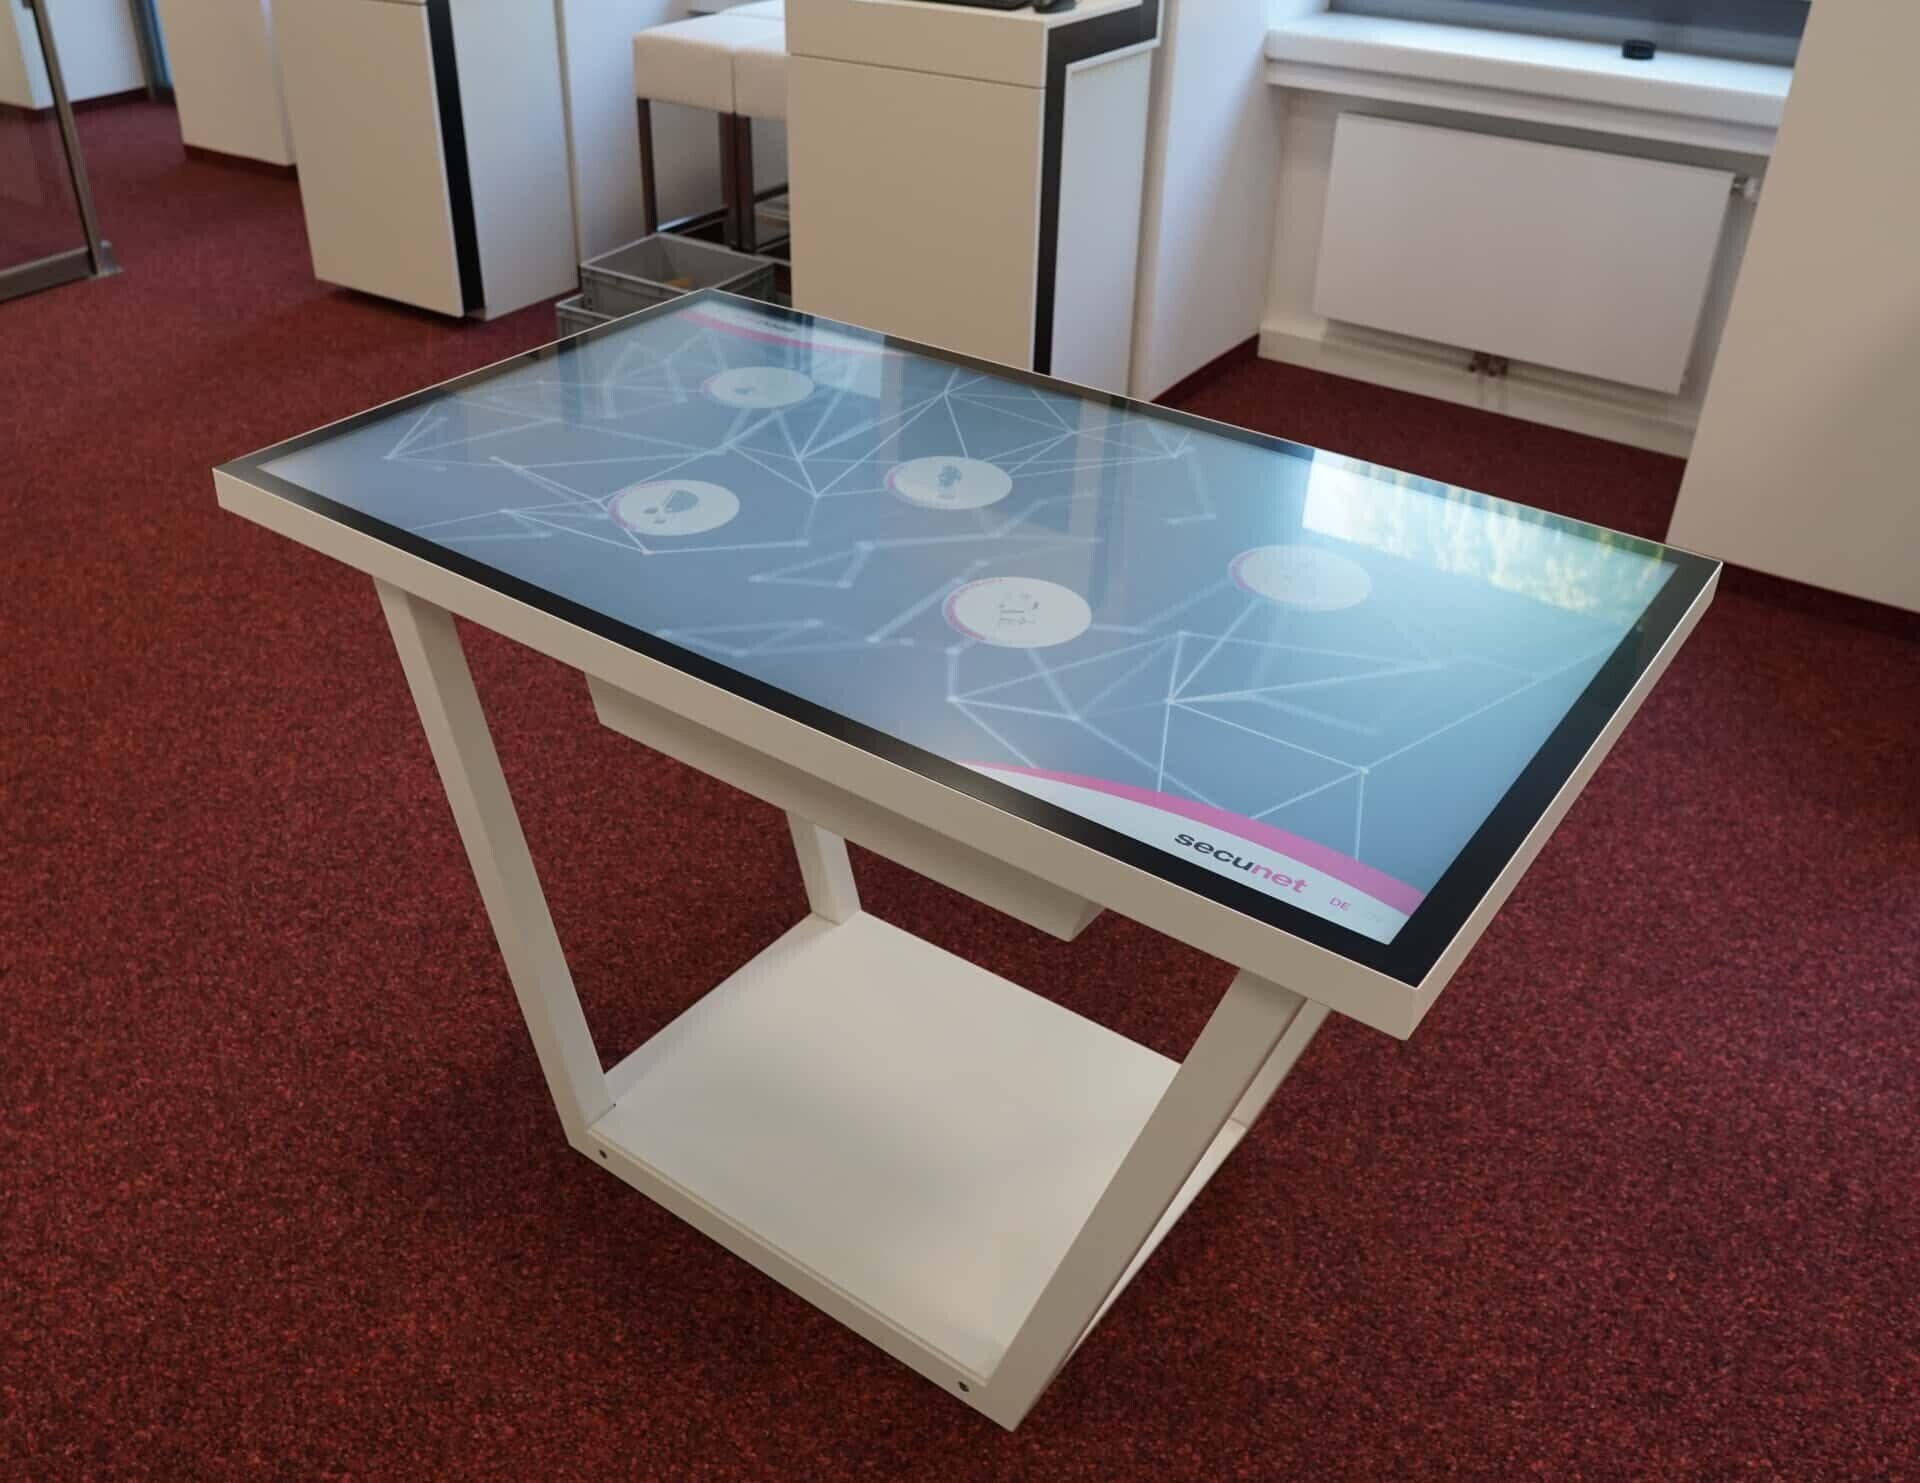 Multitouch table - schedule and plan roll-out